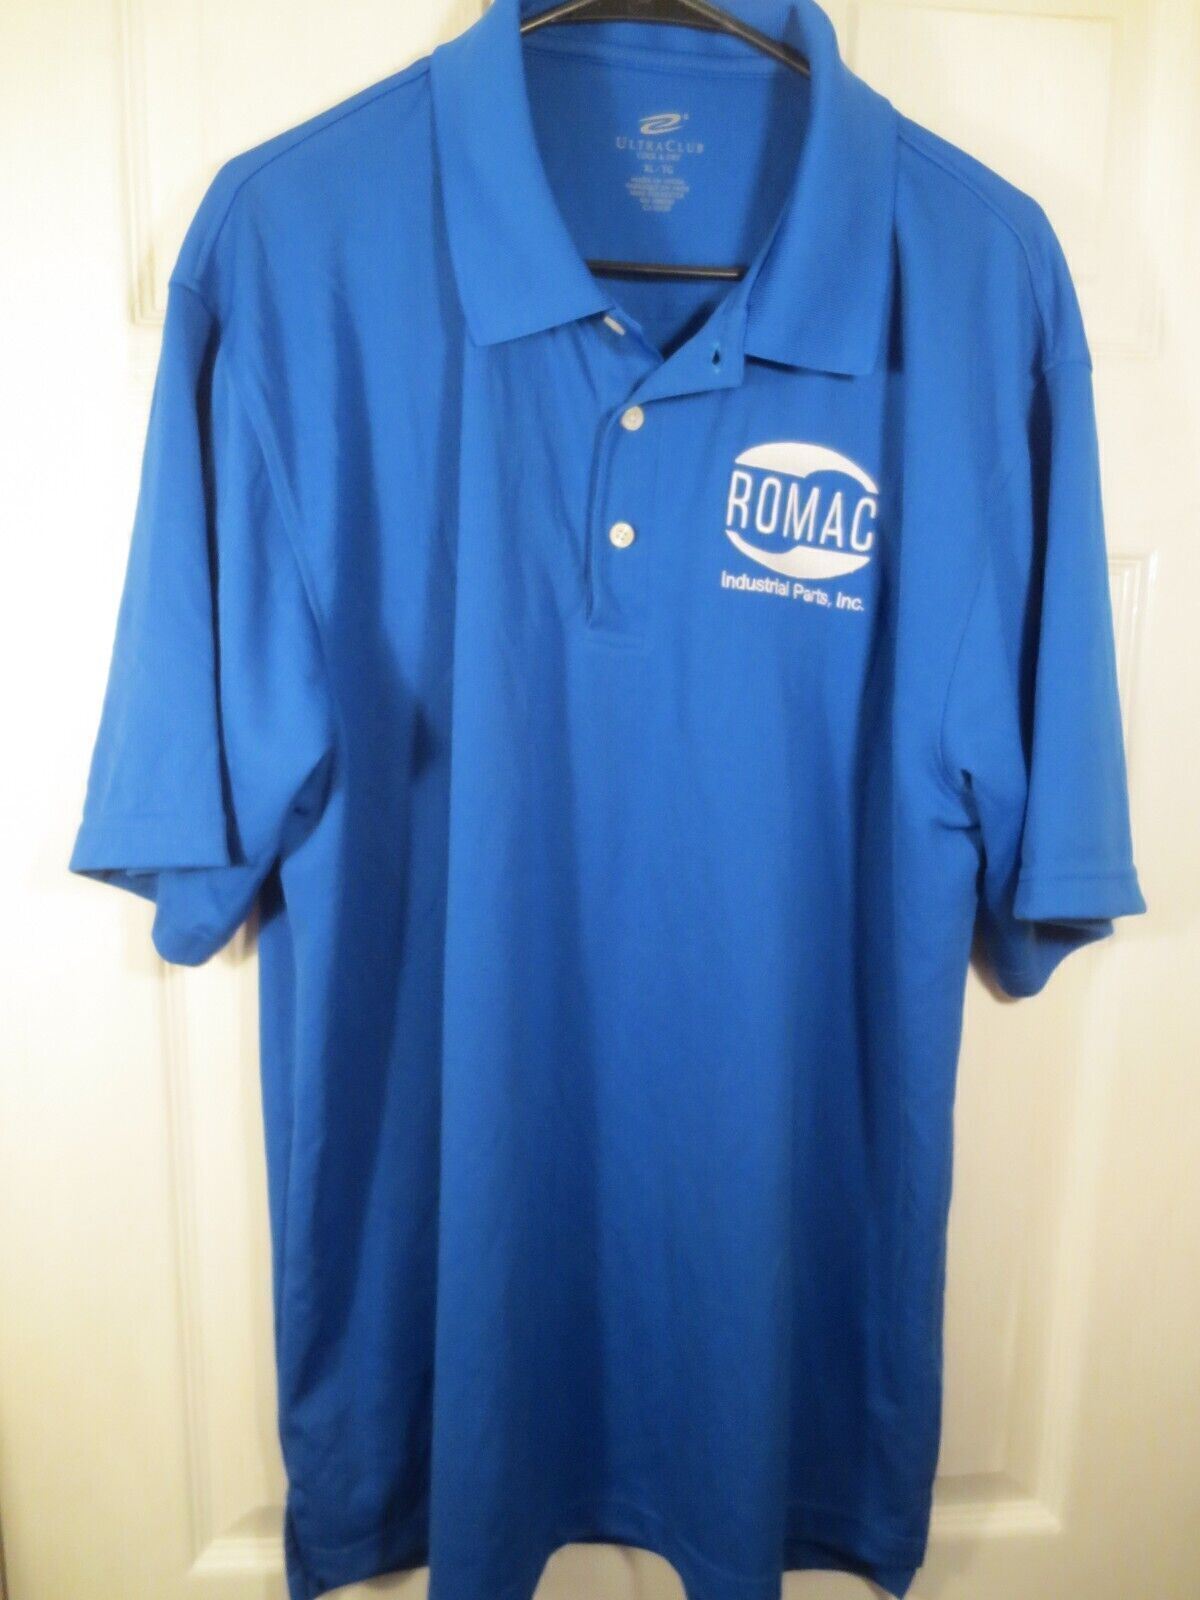 ROMAC INDUSTRIAL PARTS SUPPLY Blue Polo Shirt by Ultra Club Size XL